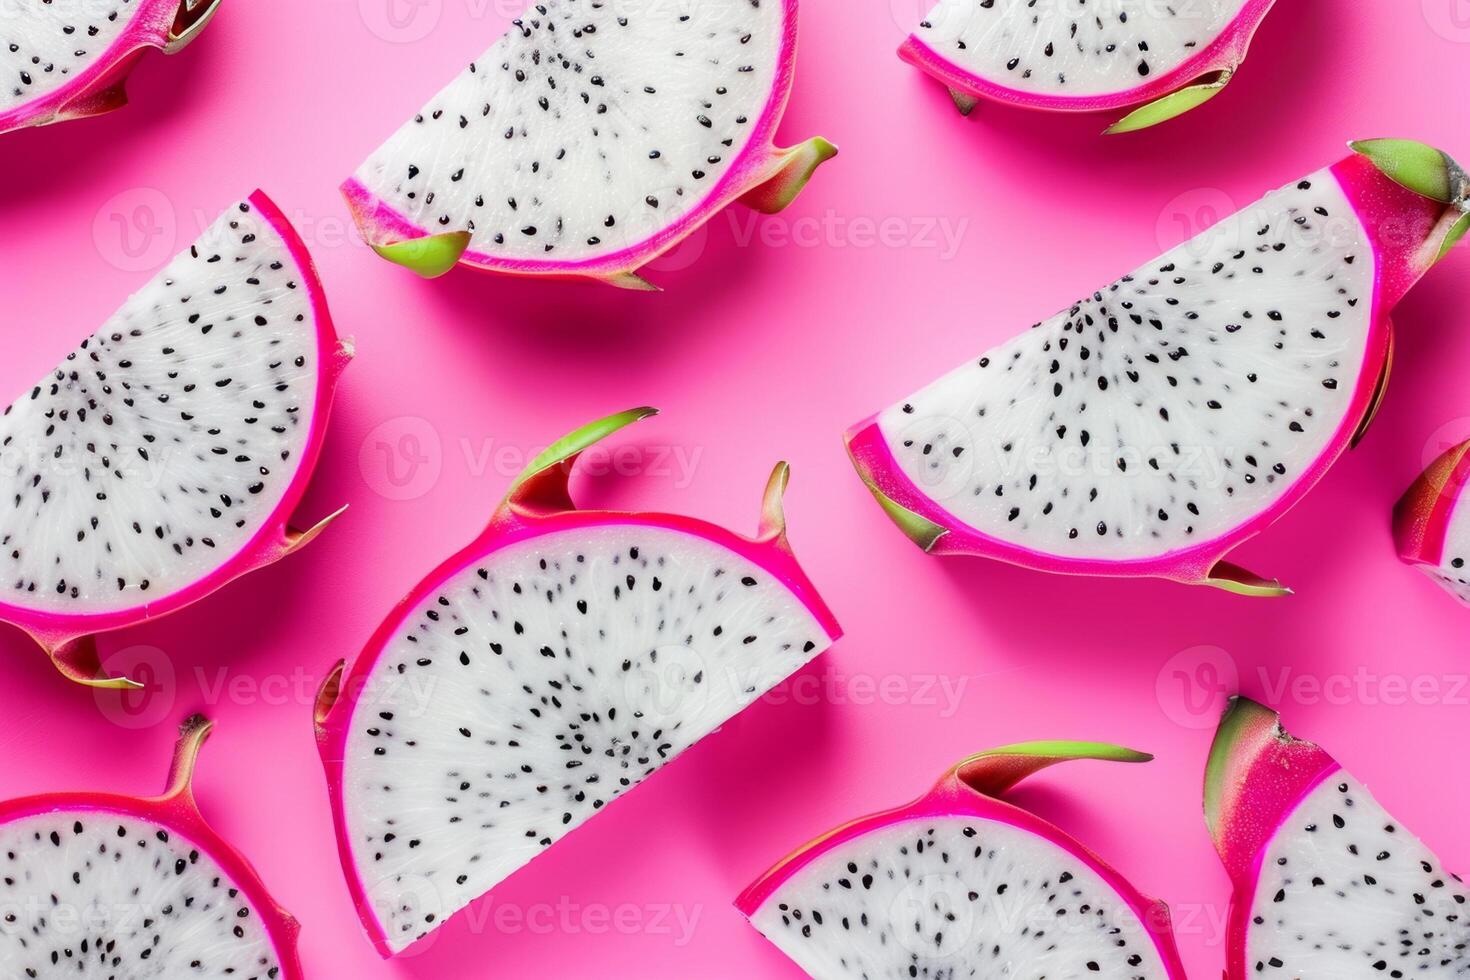 dragon fruit slices isolated on a pink to white gradient background photo